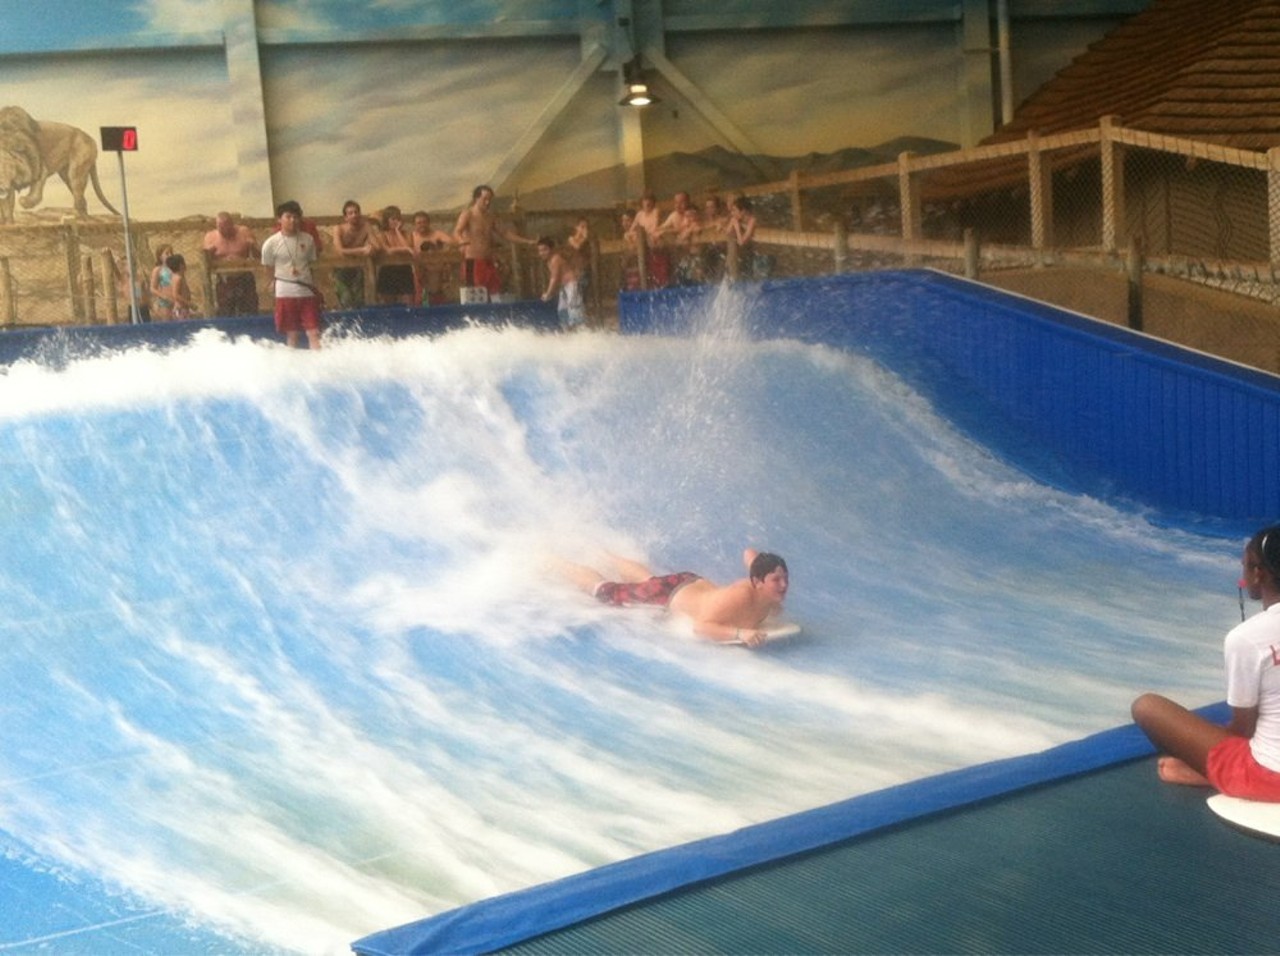  Kalahari
Everybody knows about the top attraction in Sandusky - Cedar Point. But if it’s still too cold for Cedar Point and you’re itching for some fun, Kalahari, the indoor waterpark, is just the place for a day or weekend of family activities.